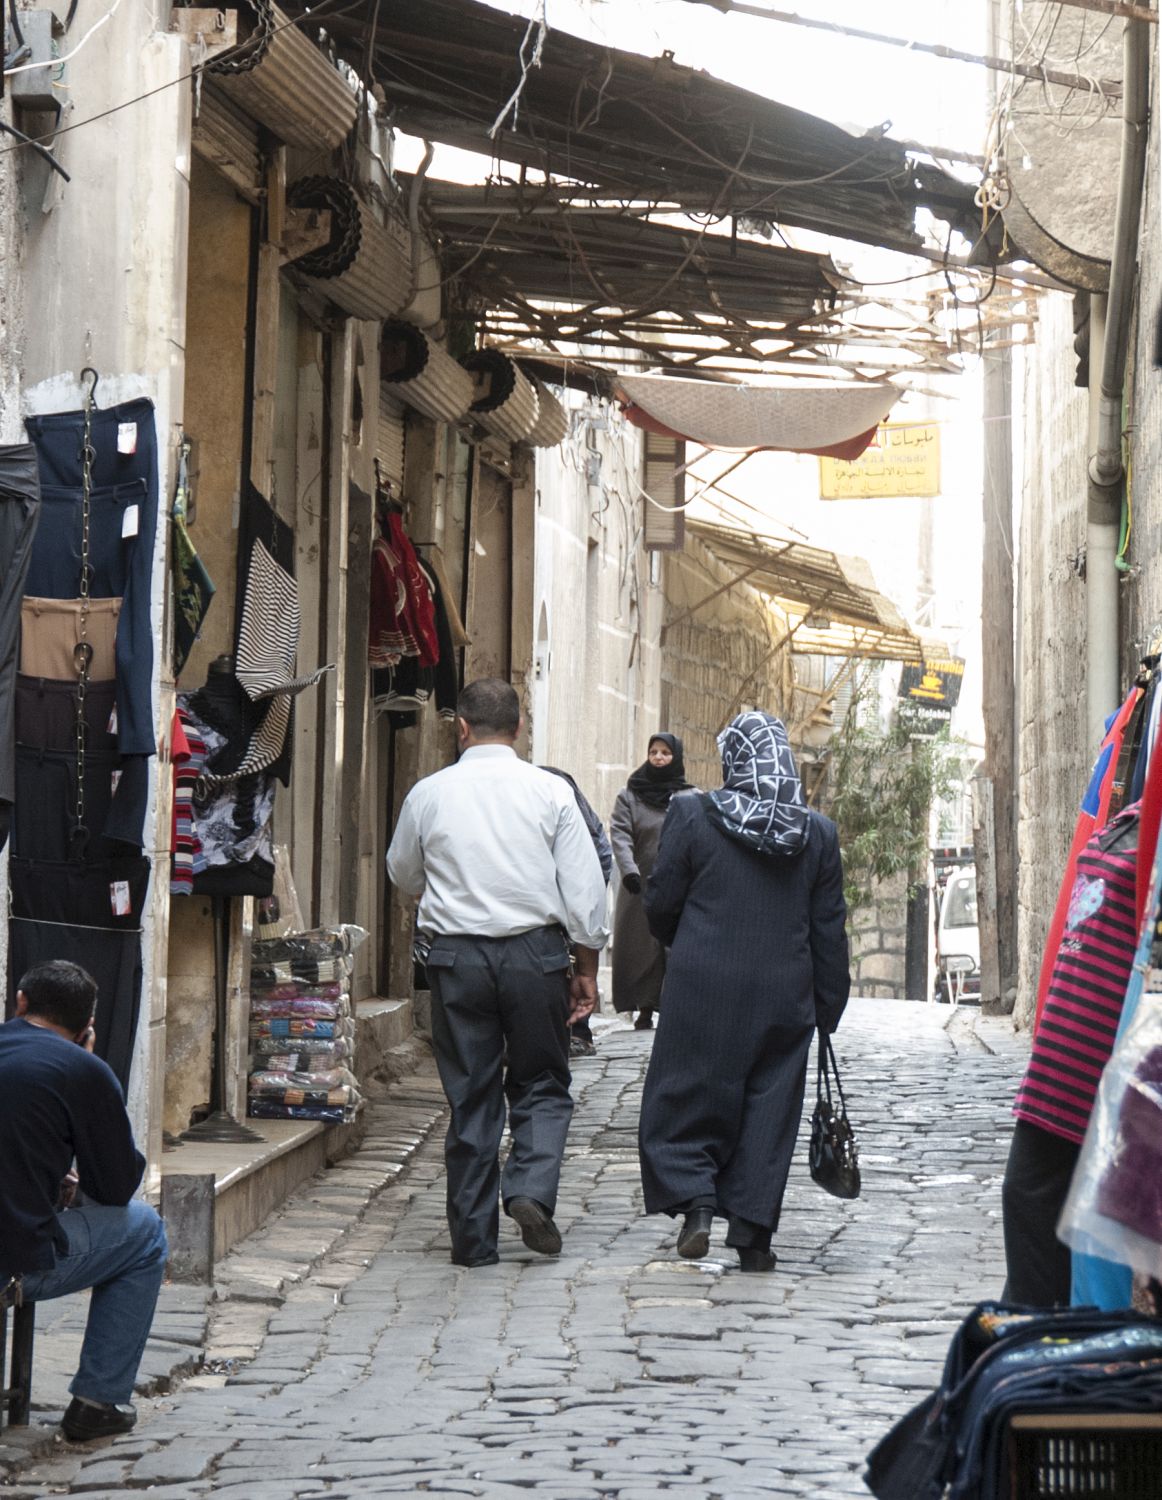 Street with awnings in Aleppo, Syria.